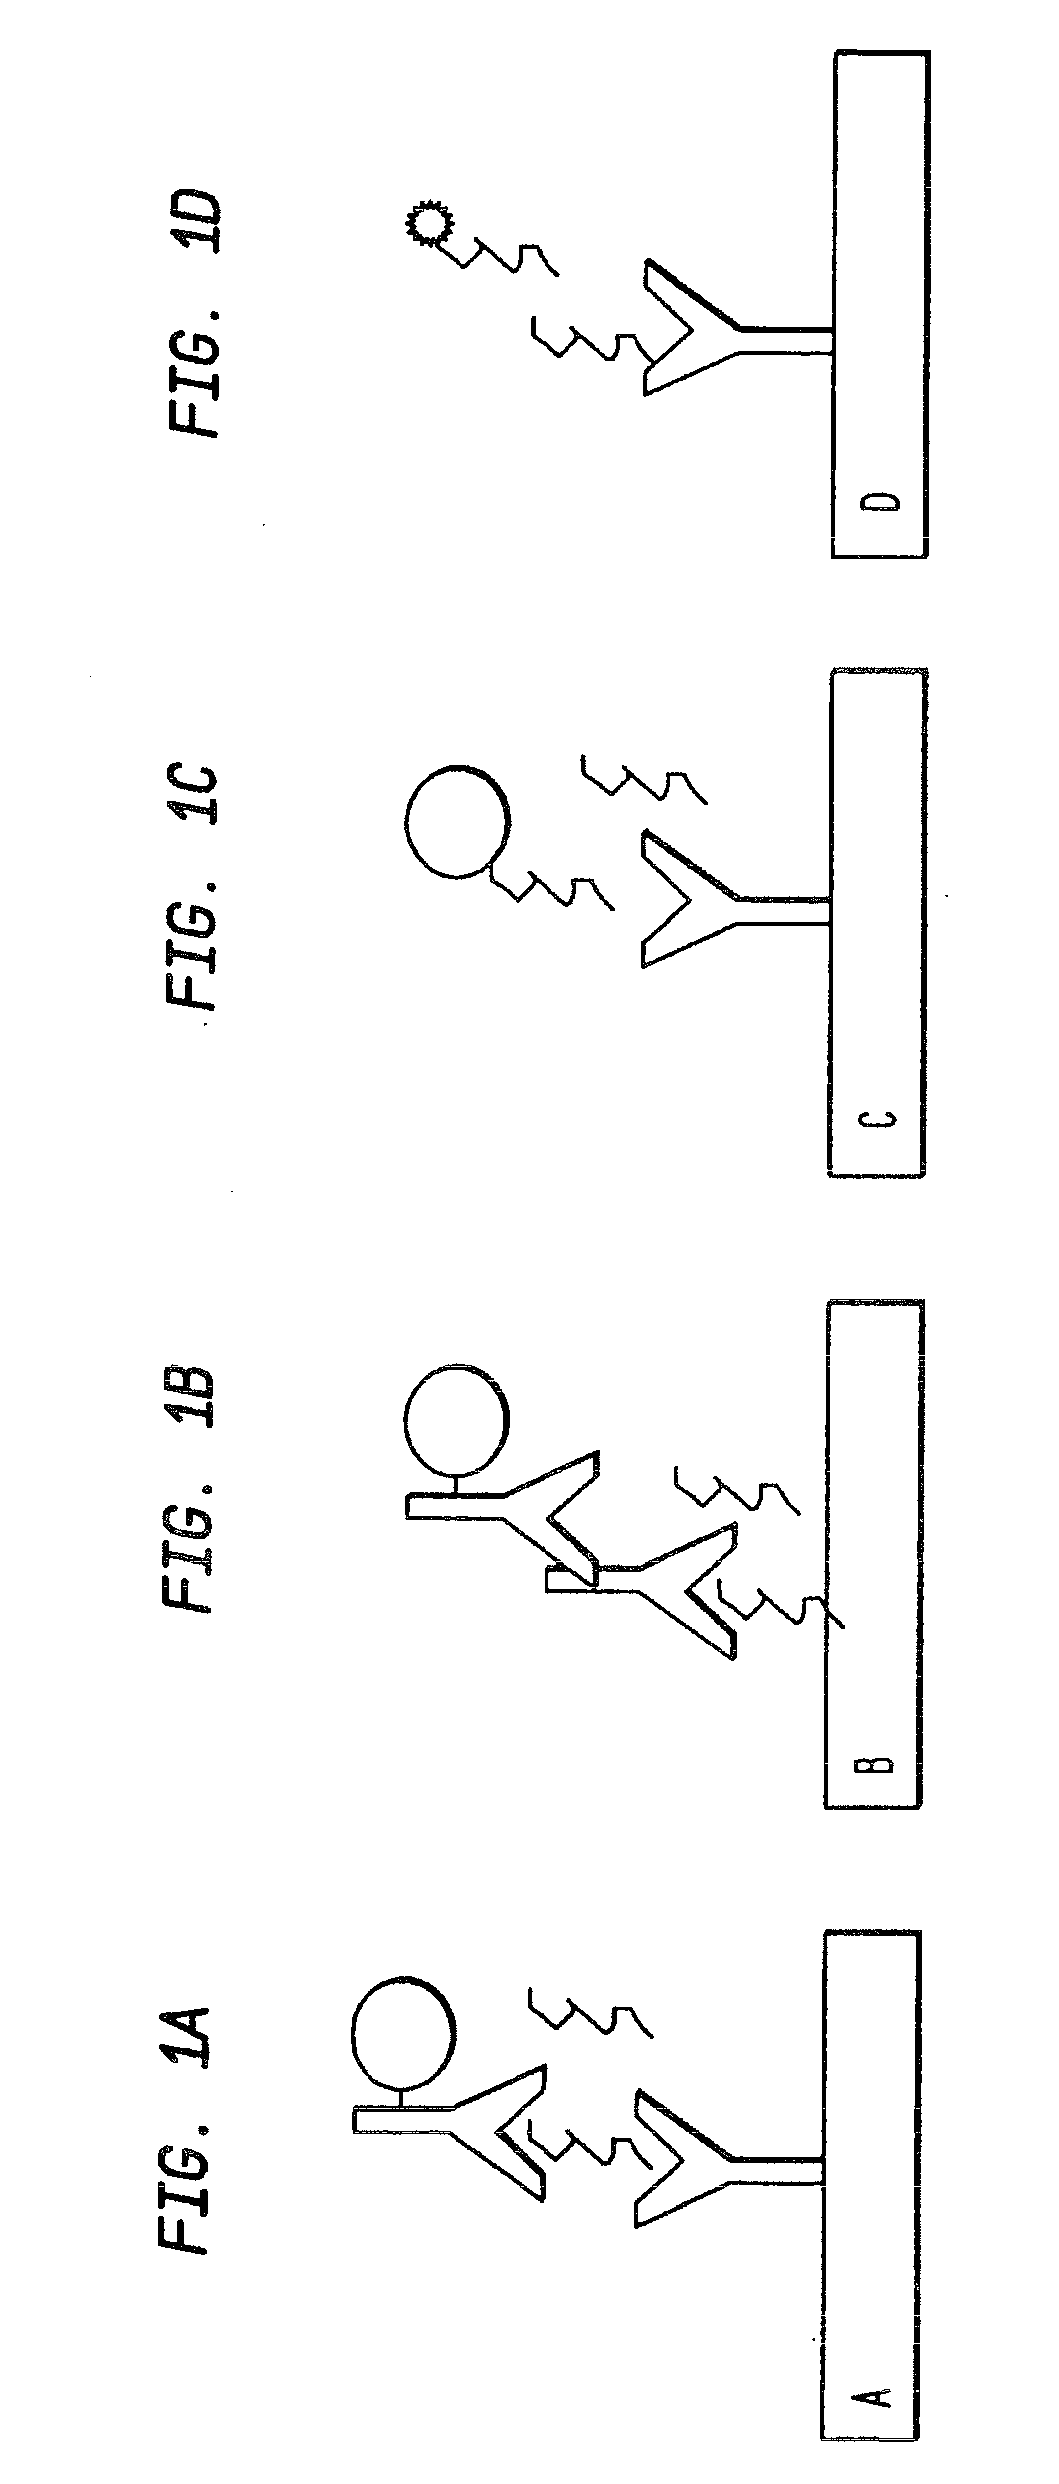 Antibody-based gamma-hydroxybutyrate (GHB) detection method and device